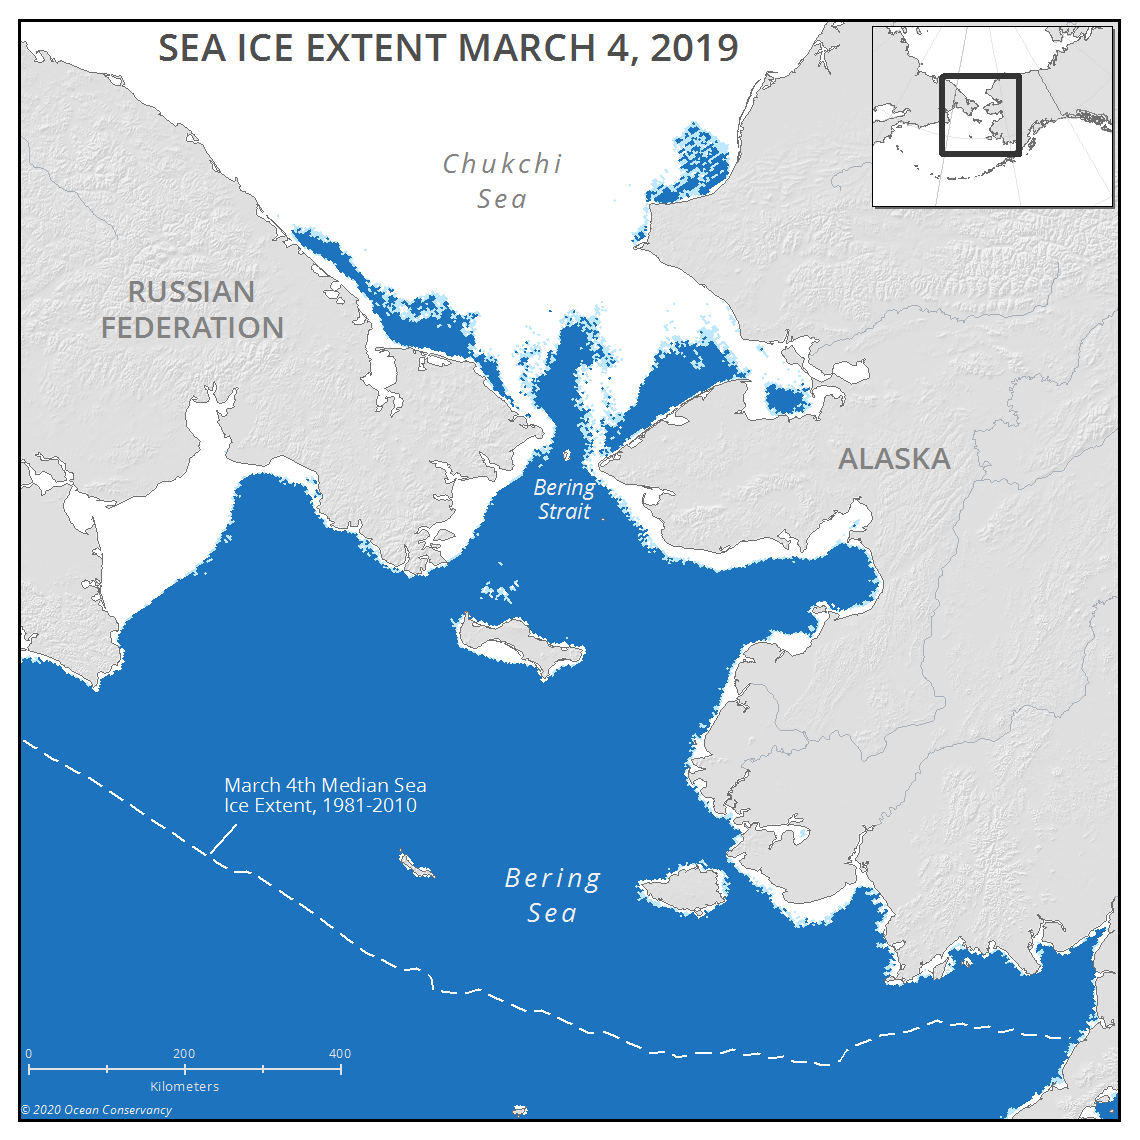 Bering Sea Ice 2019 March 4th sea ice extent